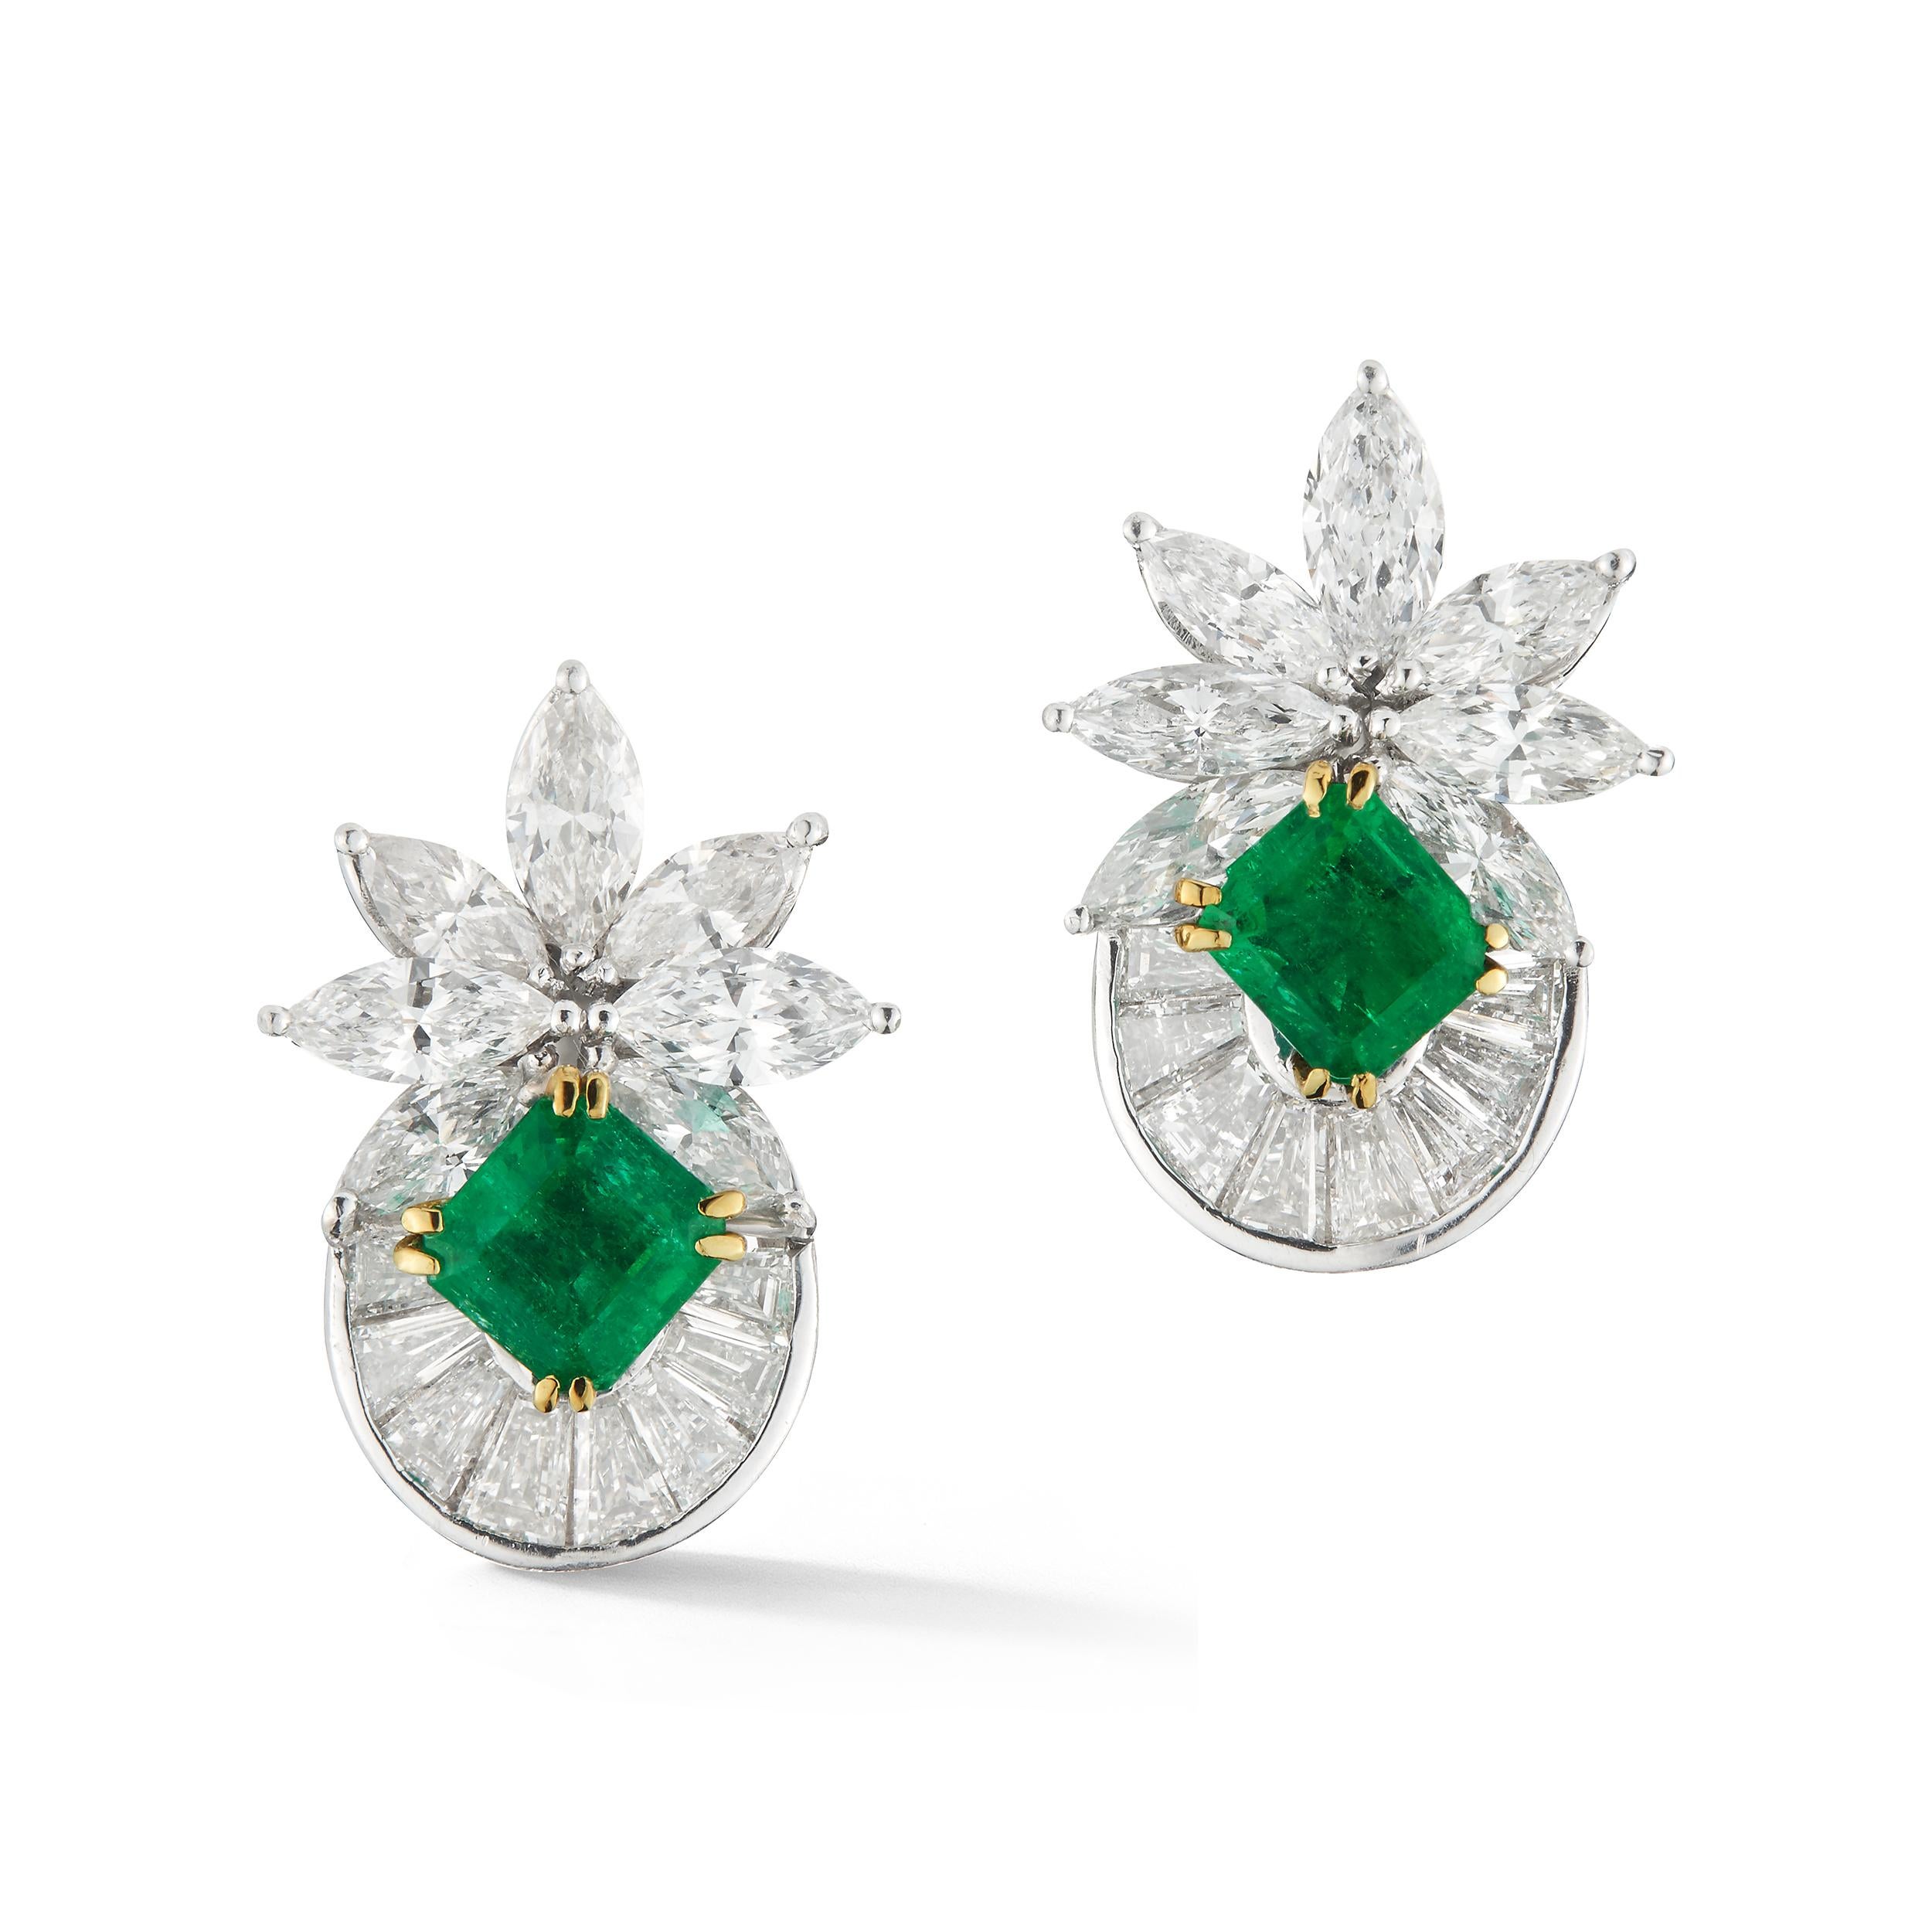 Elegant Diamond and Emerald Earrings, Set with 5 carat of Marquis shaped Diamond plus 5 carat of Baguettes shaped Diamonds. in the center the Earrings are set with two Emeralds.